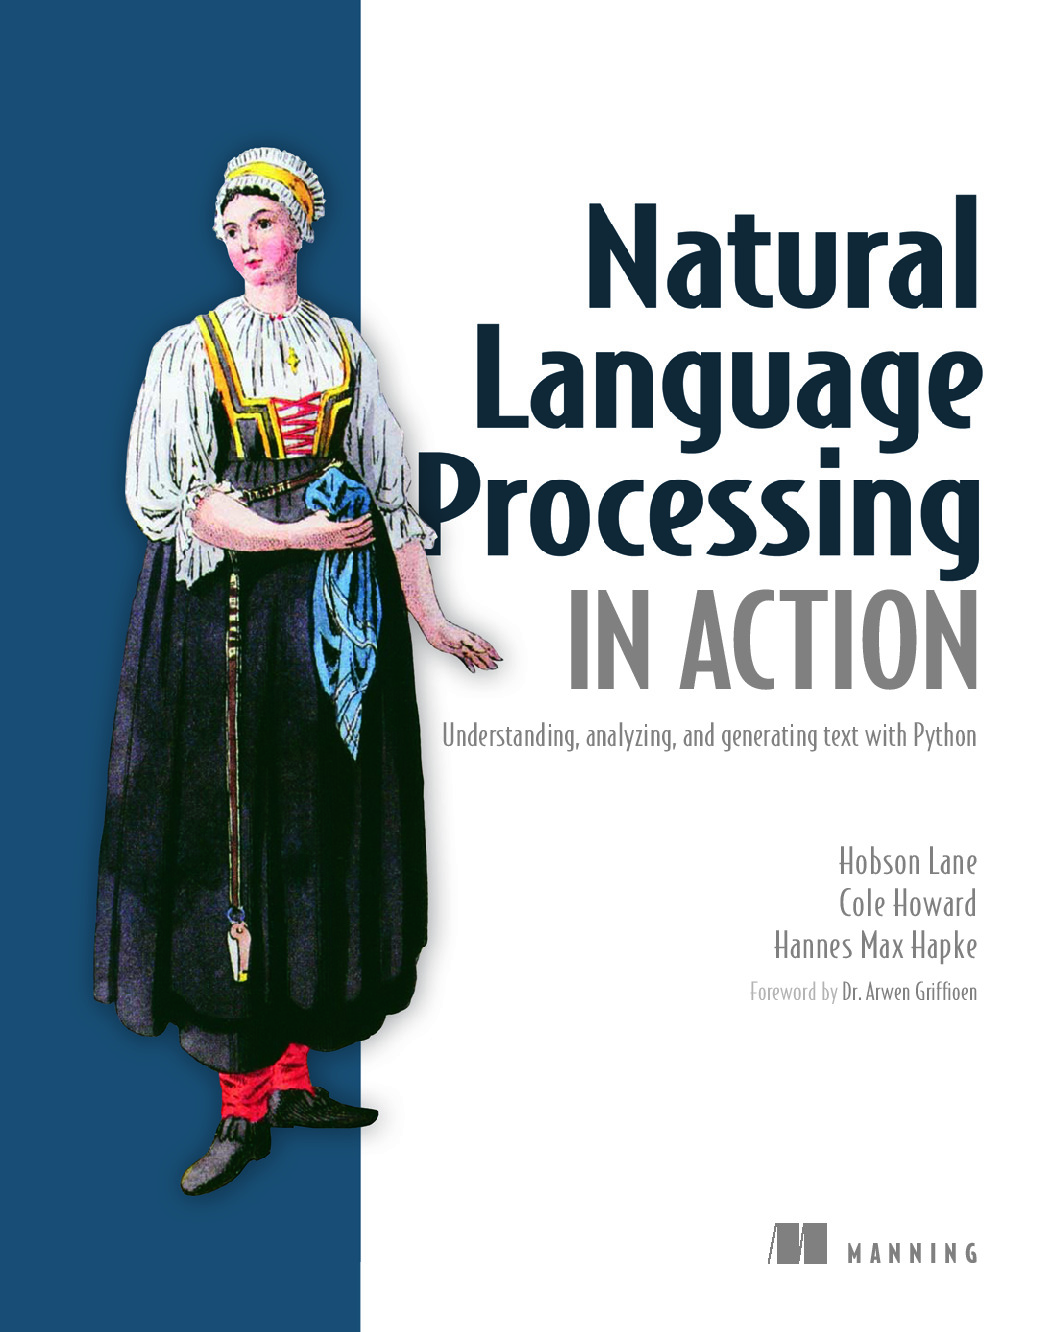 Natural Language Processing in Action – Understanding, analyzing, and generating text with Python